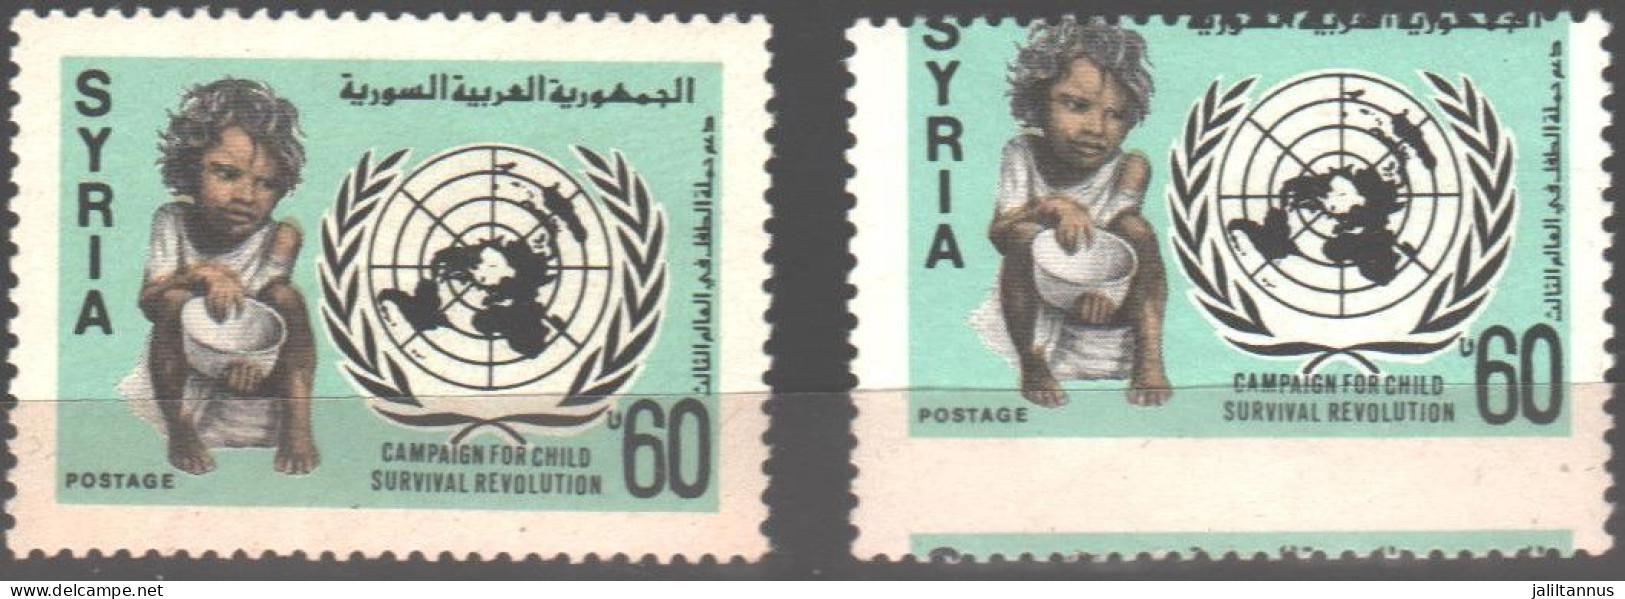 Syria - Perforation Error Set Emblem And Child With Empty Bowl 1985 Stamp For Comparison MNH - Syrie